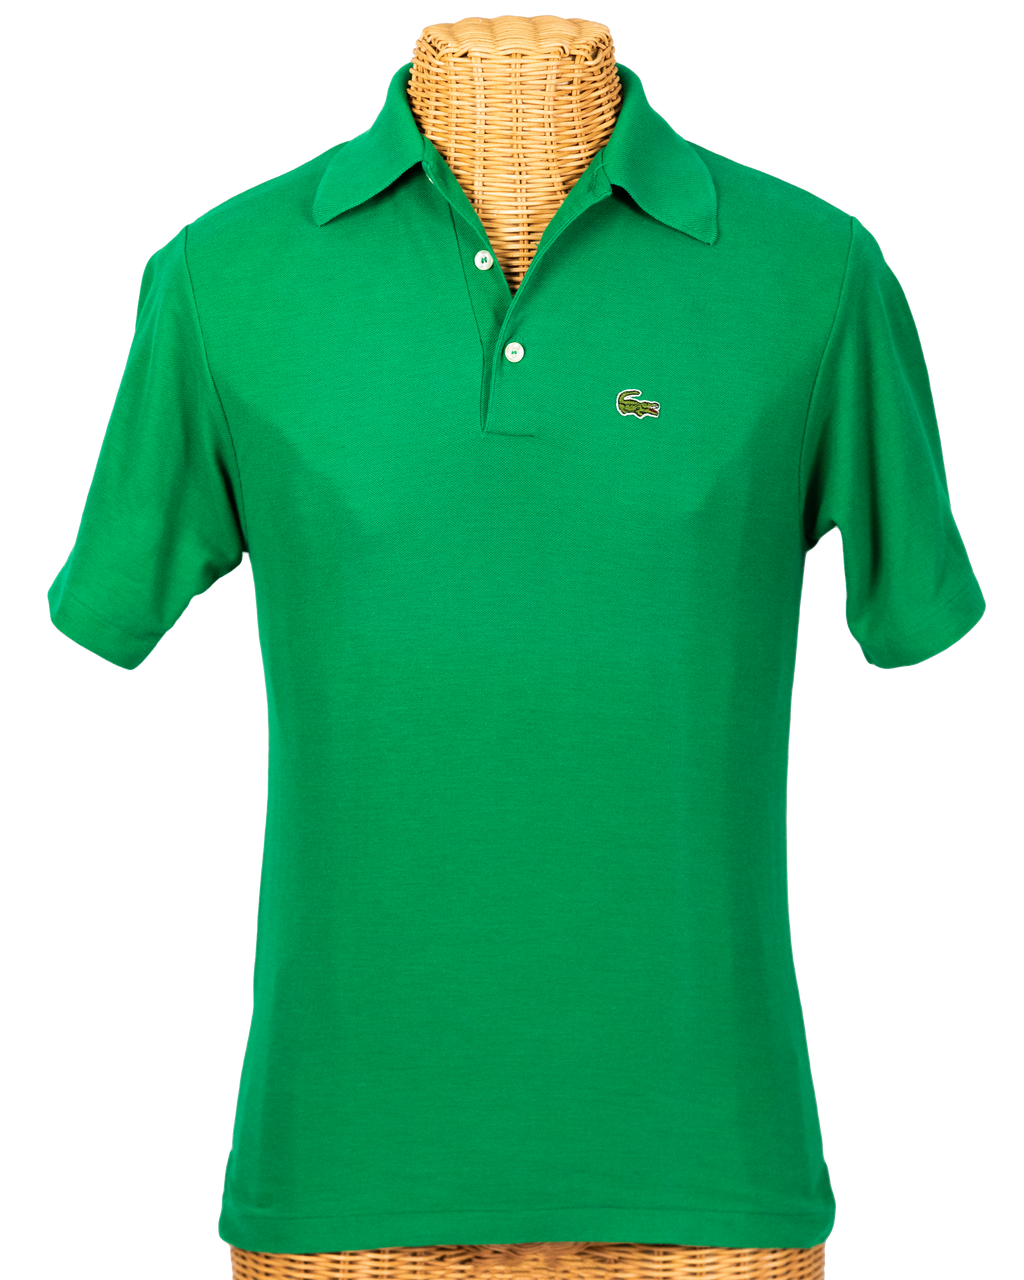 New and used Lacoste Men's Polo Shirts for sale, Facebook Marketplace